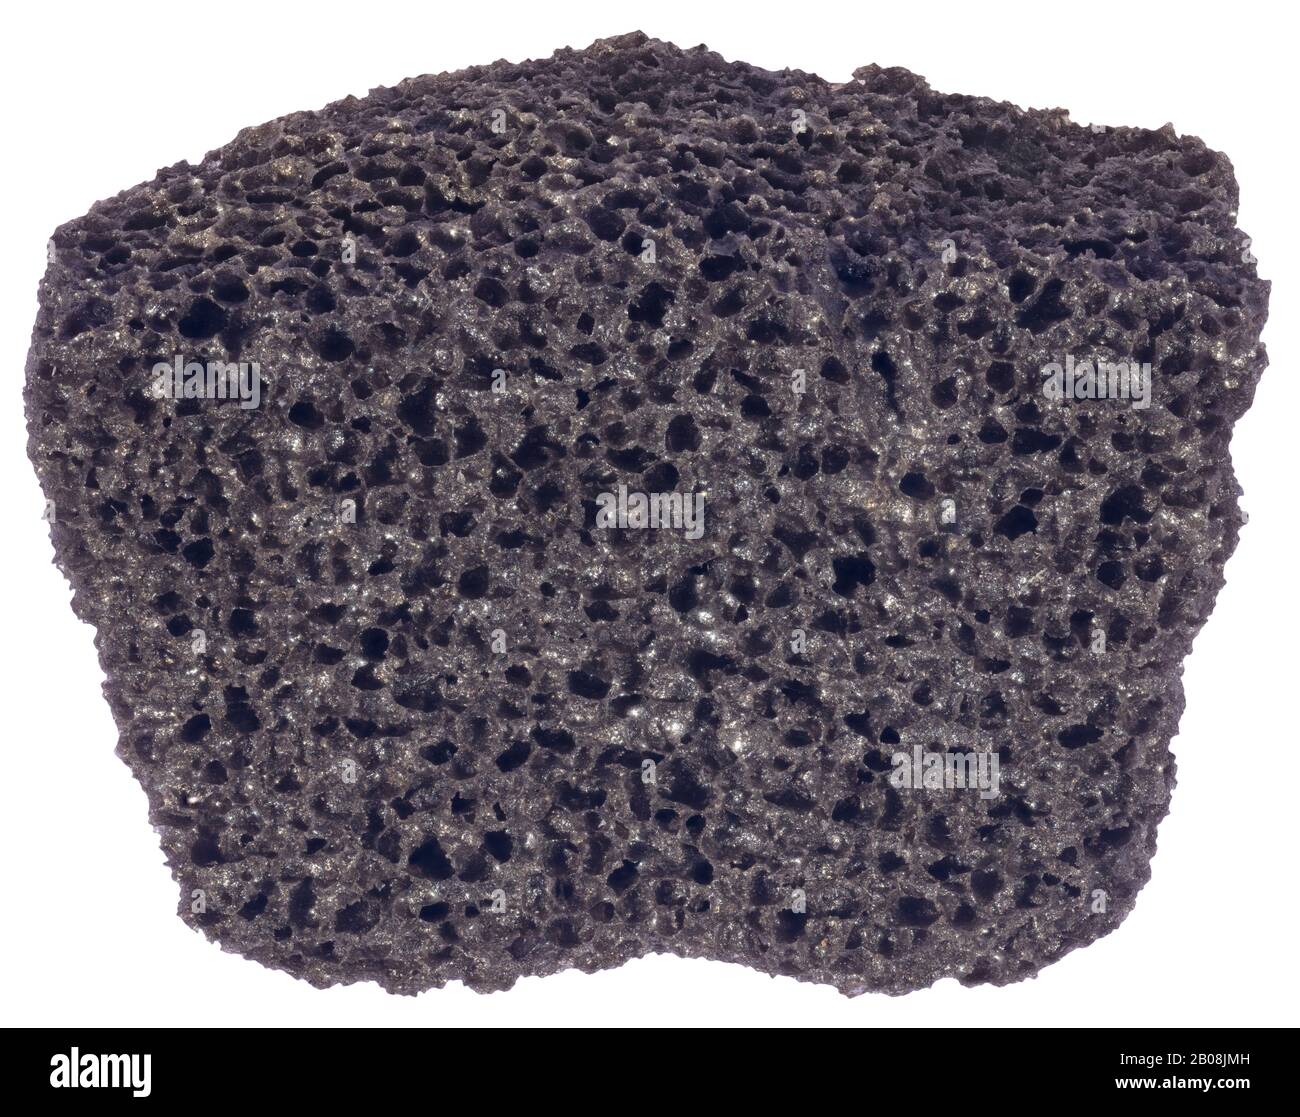 Pumice, Igneous, Mexico Pumice is a volcanic rock that consists of highly vesicular rough textured volcanic glass, which may or may not contain crysta Stock Photo